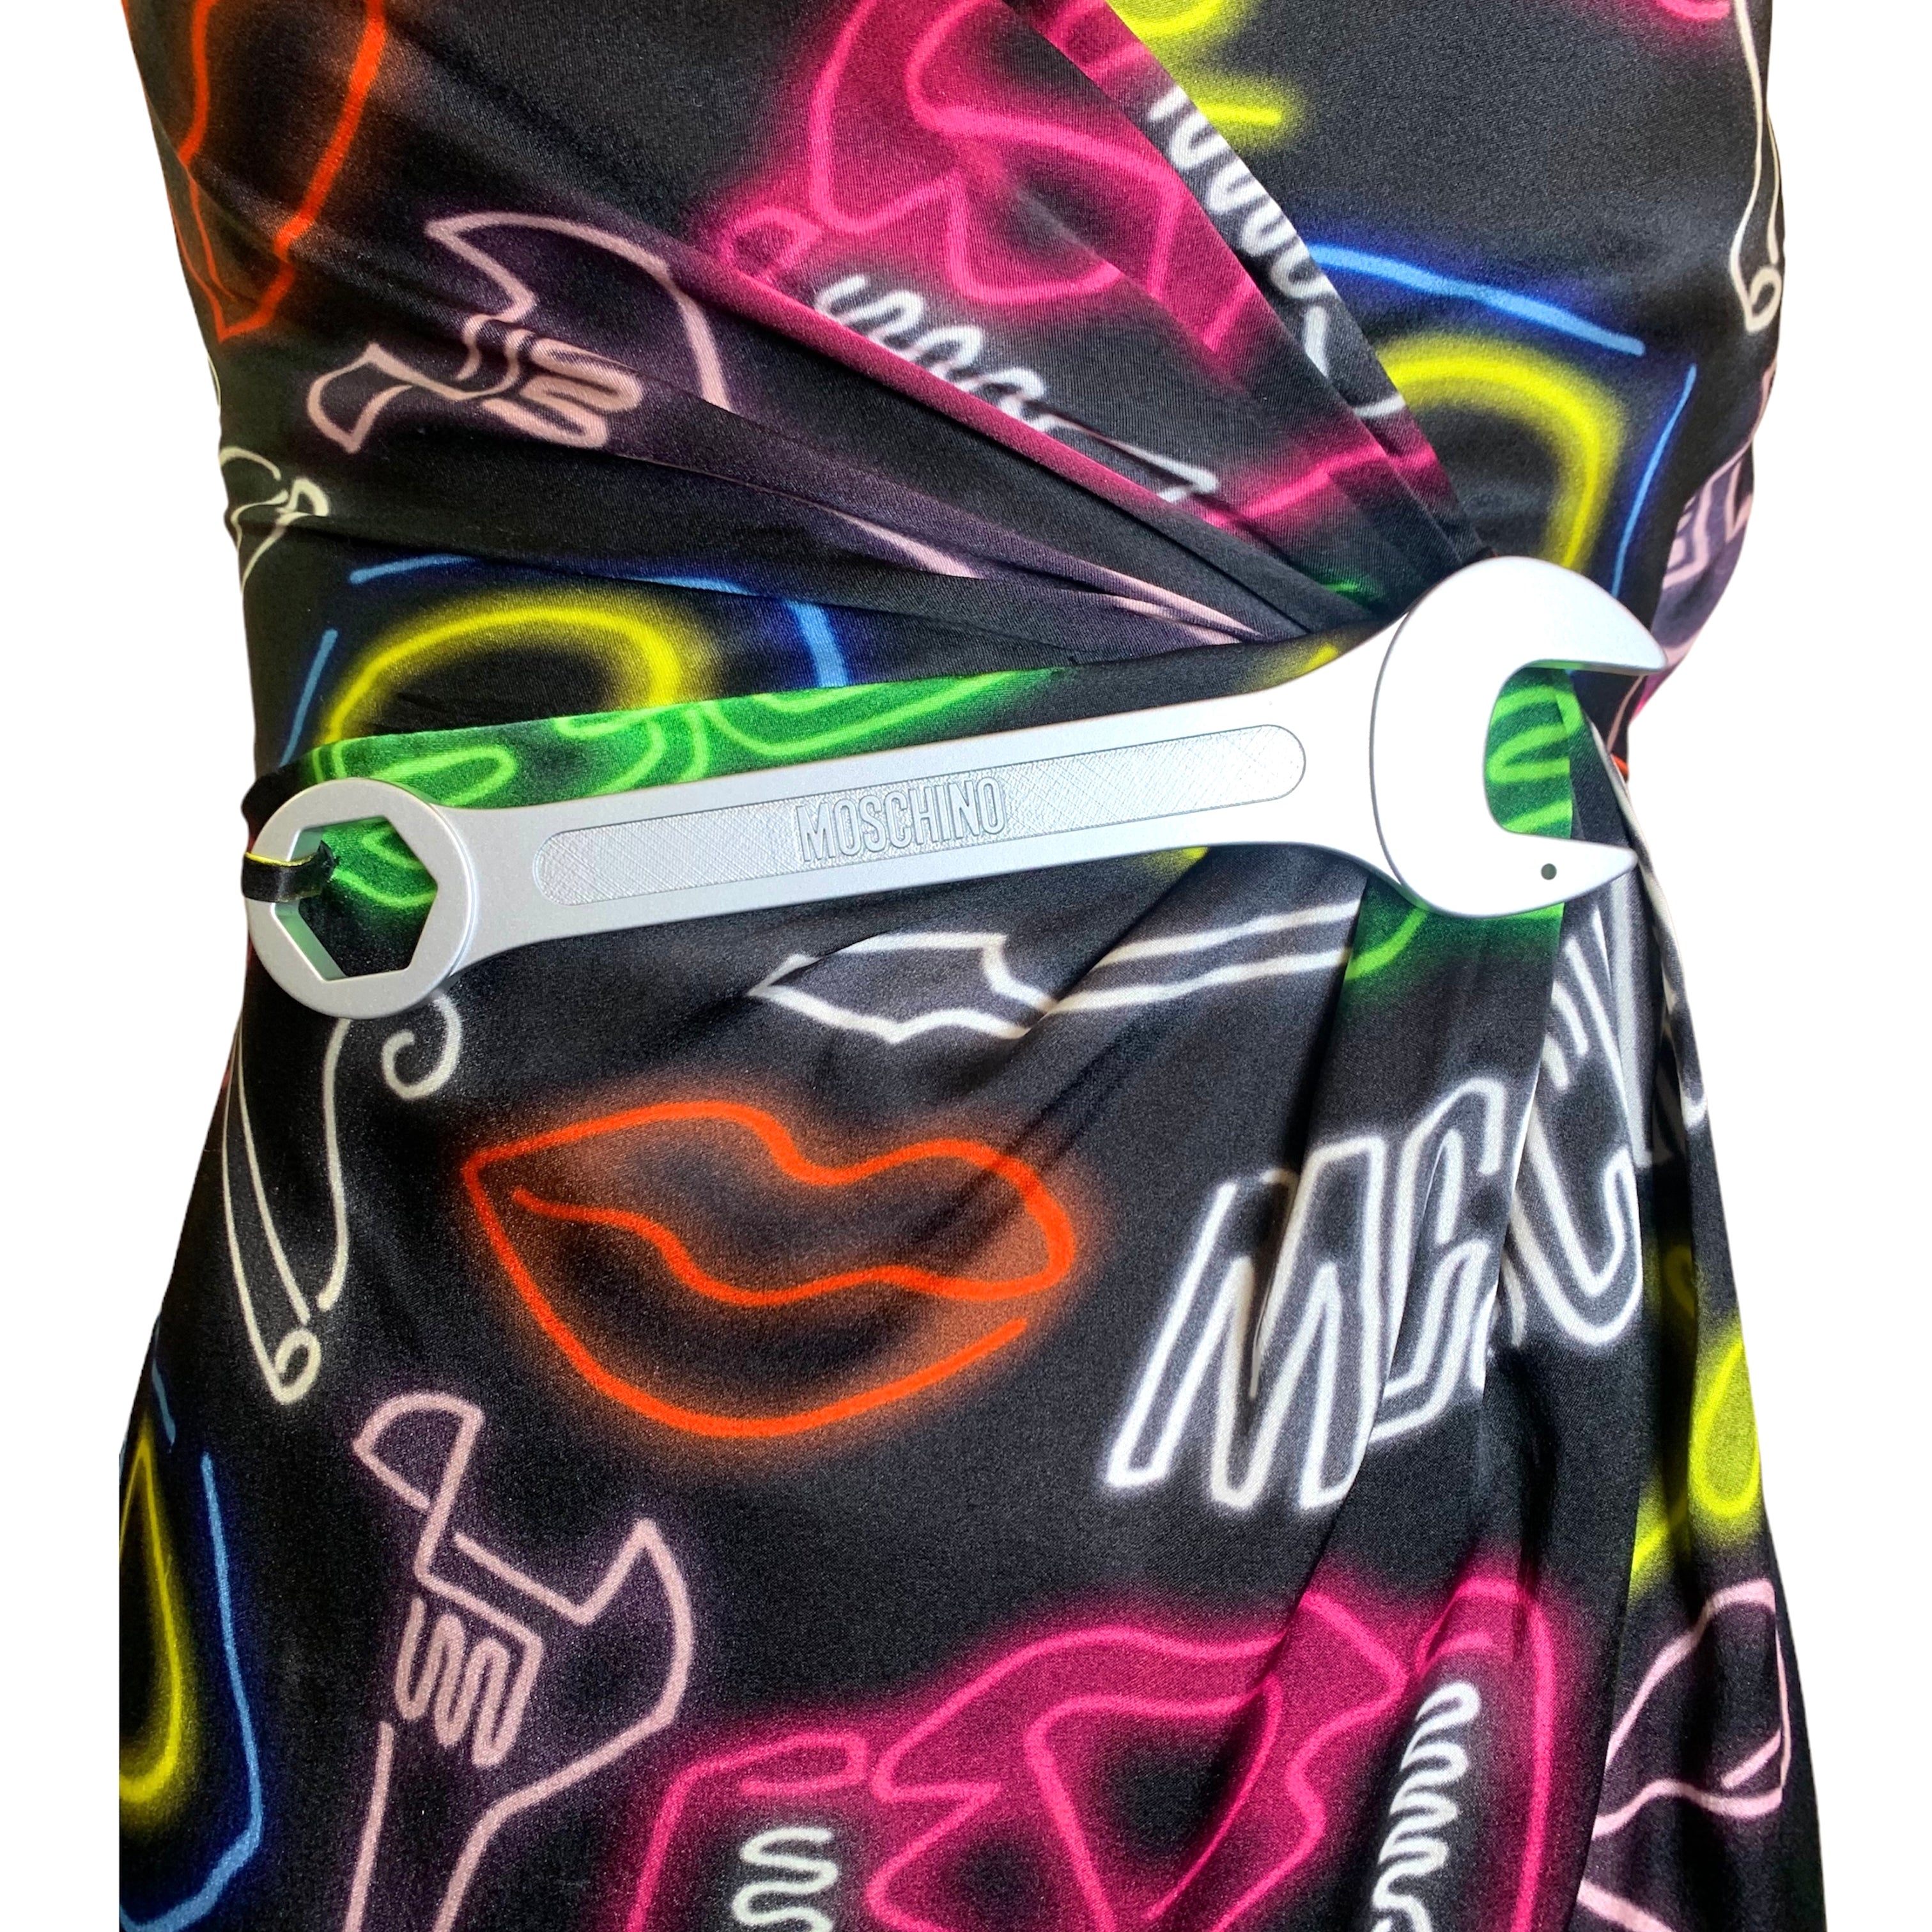 Moschino Couture SS 2016 Neon Sign Novelty Print Silk Gown FRONT DETAIL